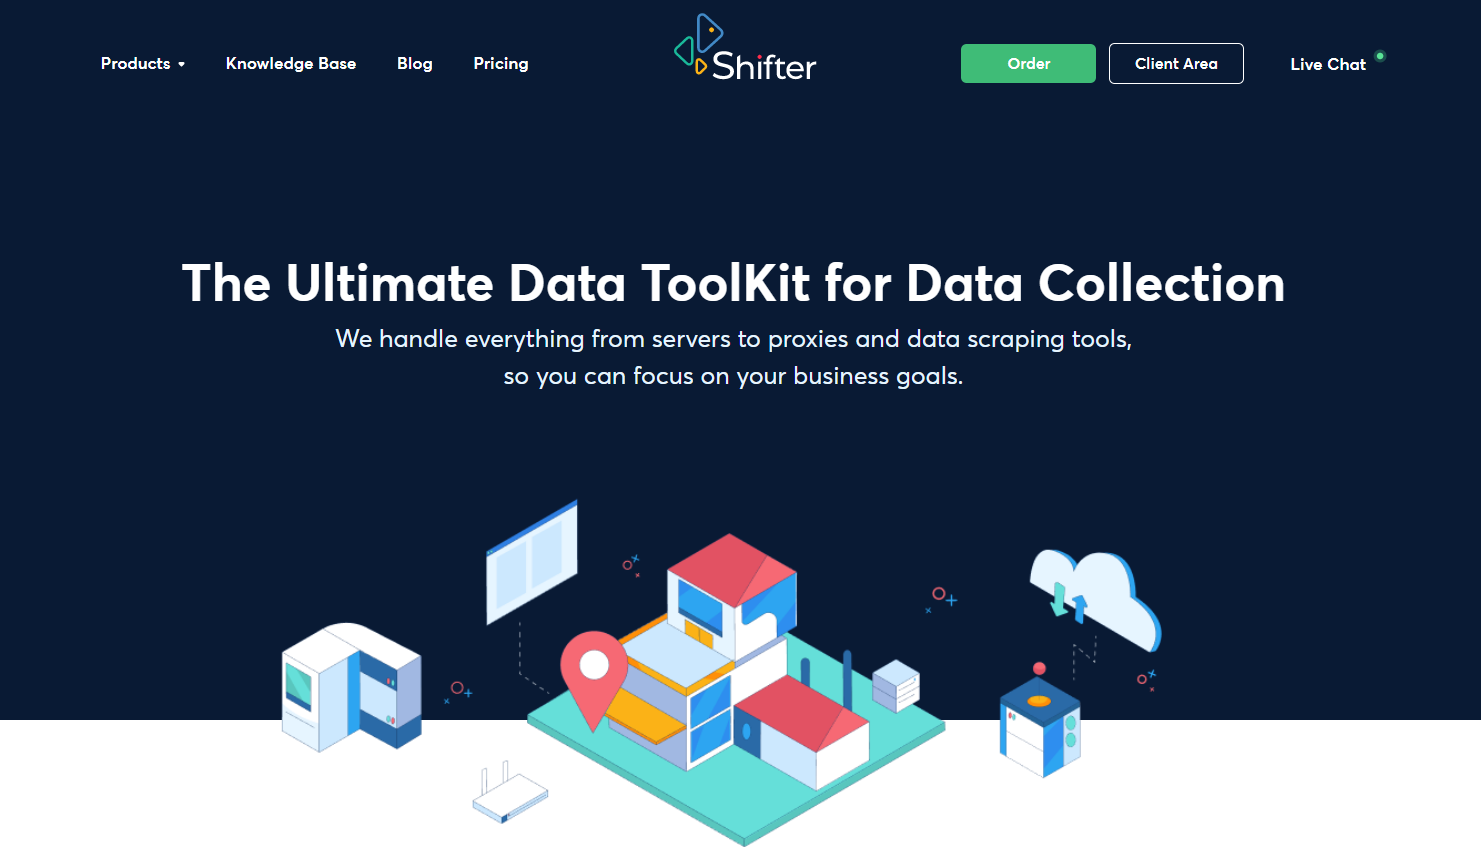 Shifter data collection tool